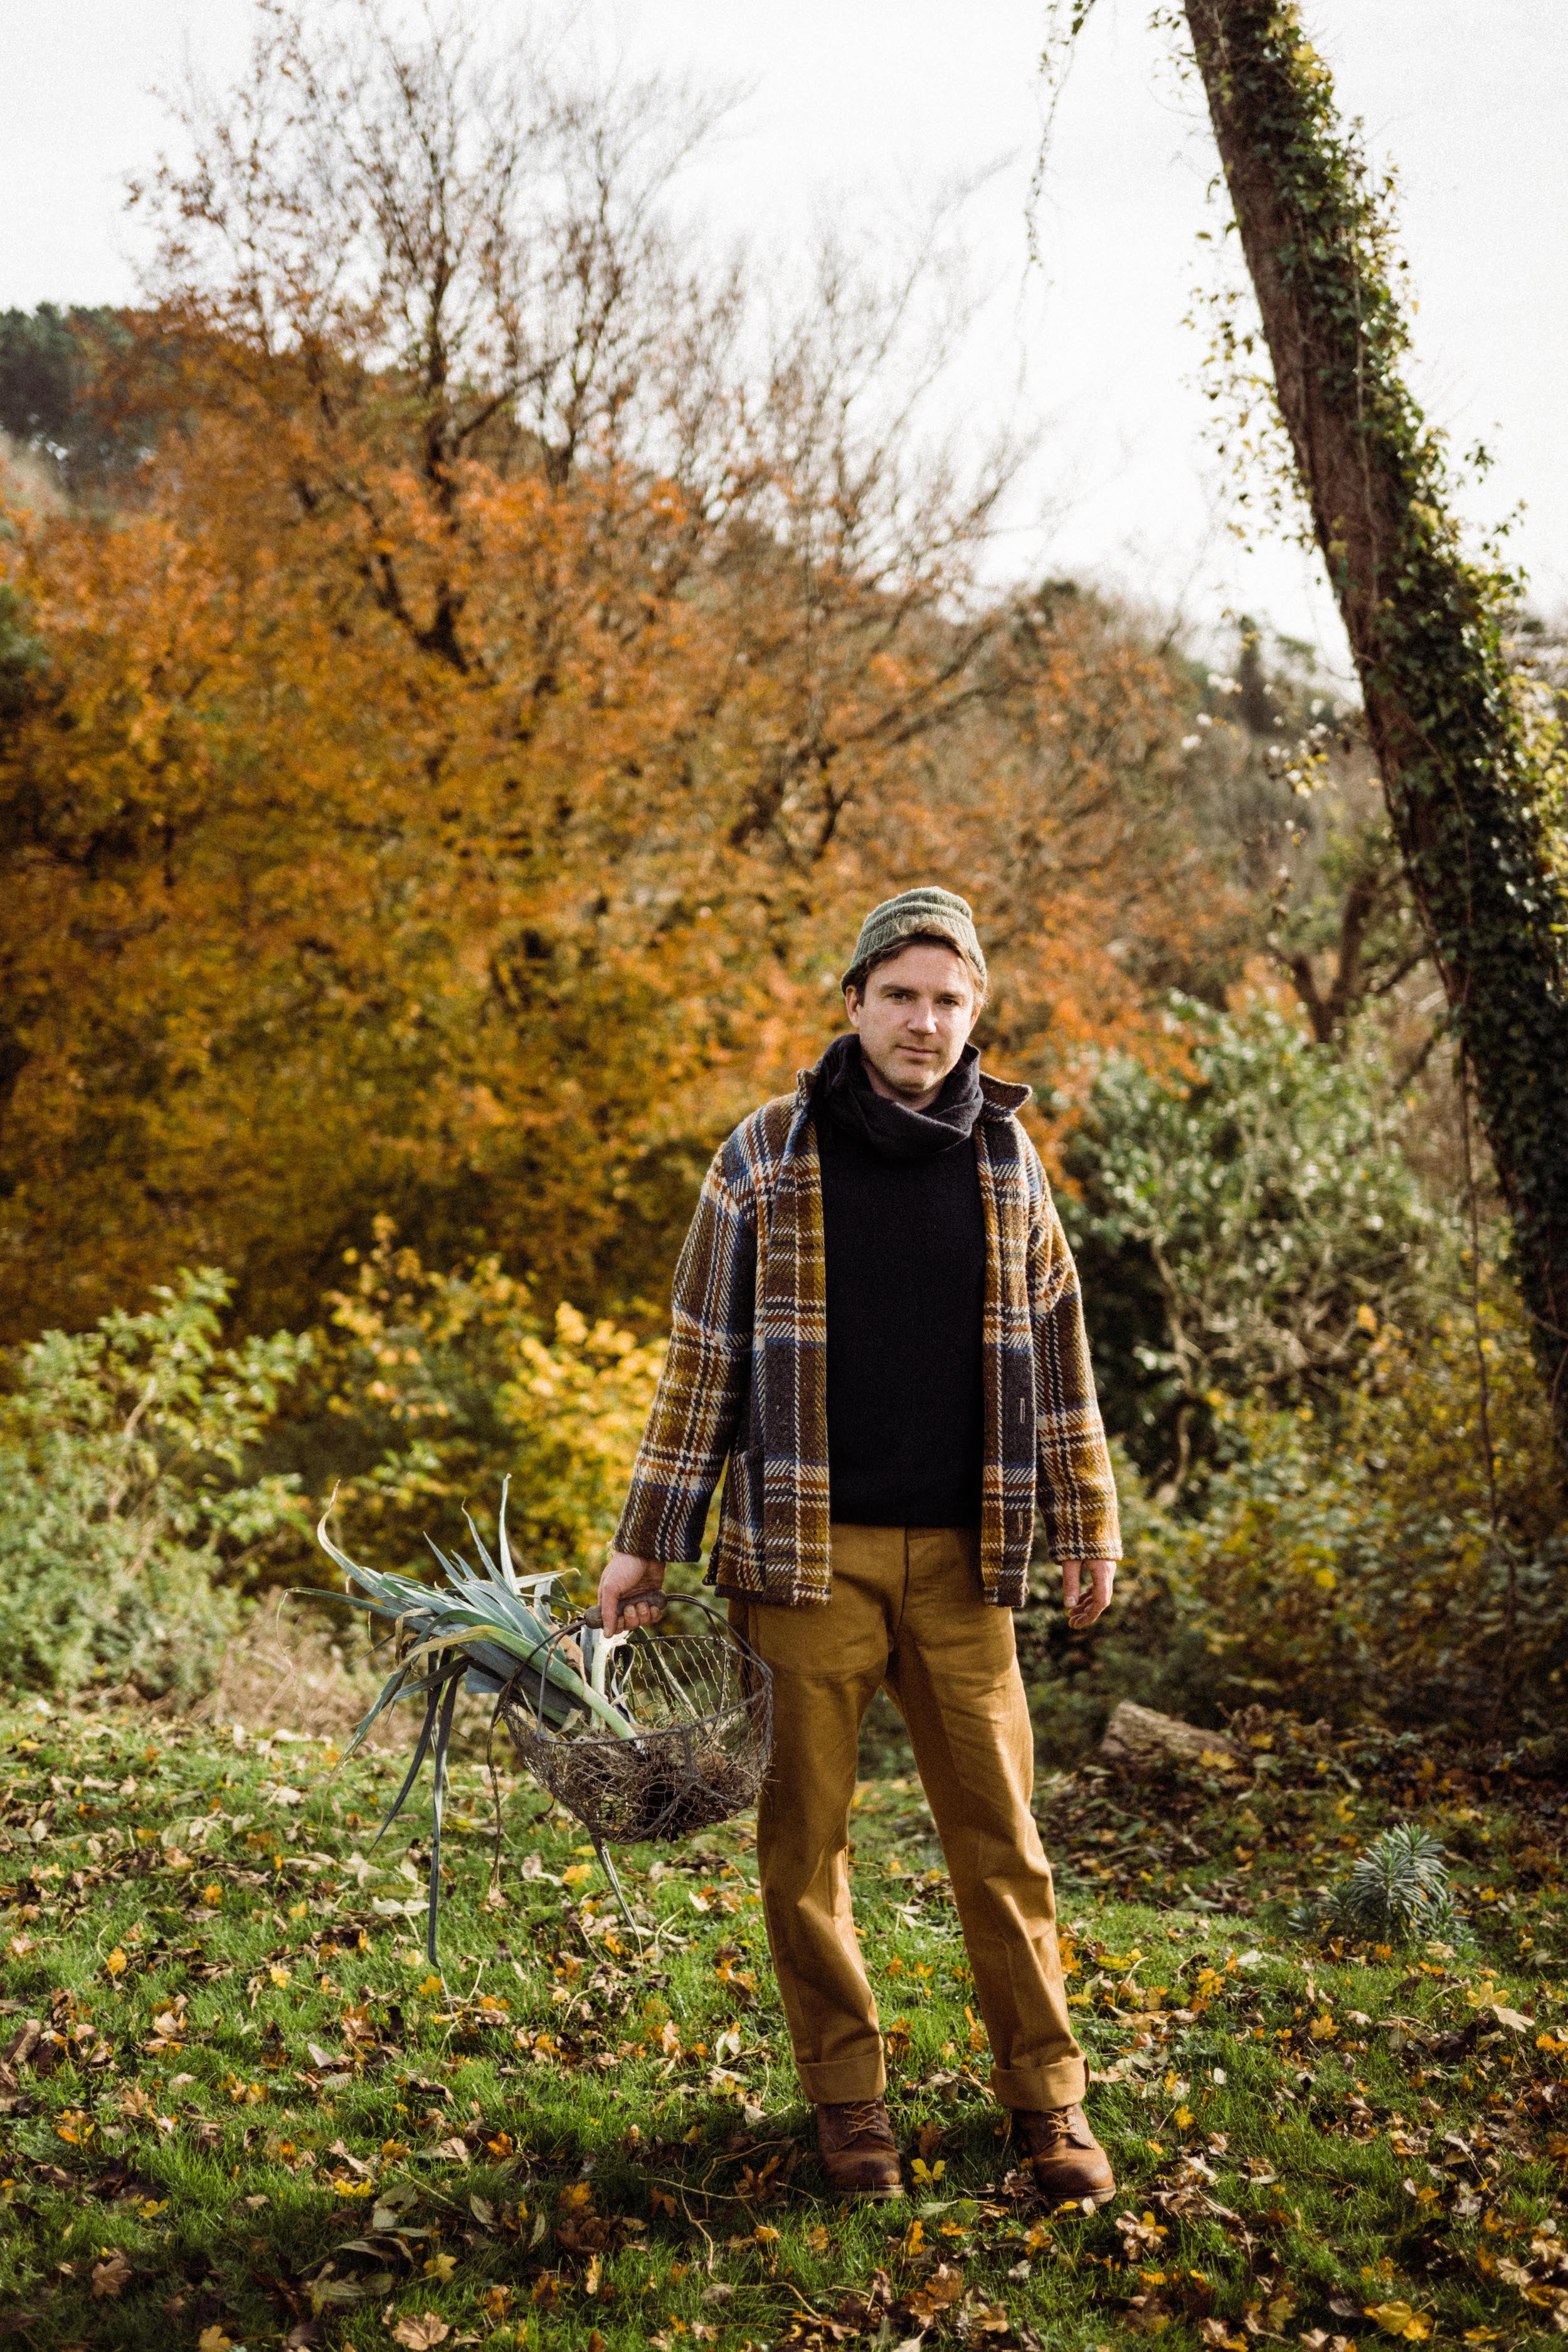 Man wears Carrier Company Celtic Wool Jacket in Slate & Russet with Traditional Guernsey and Men's Work Trouser in Tan